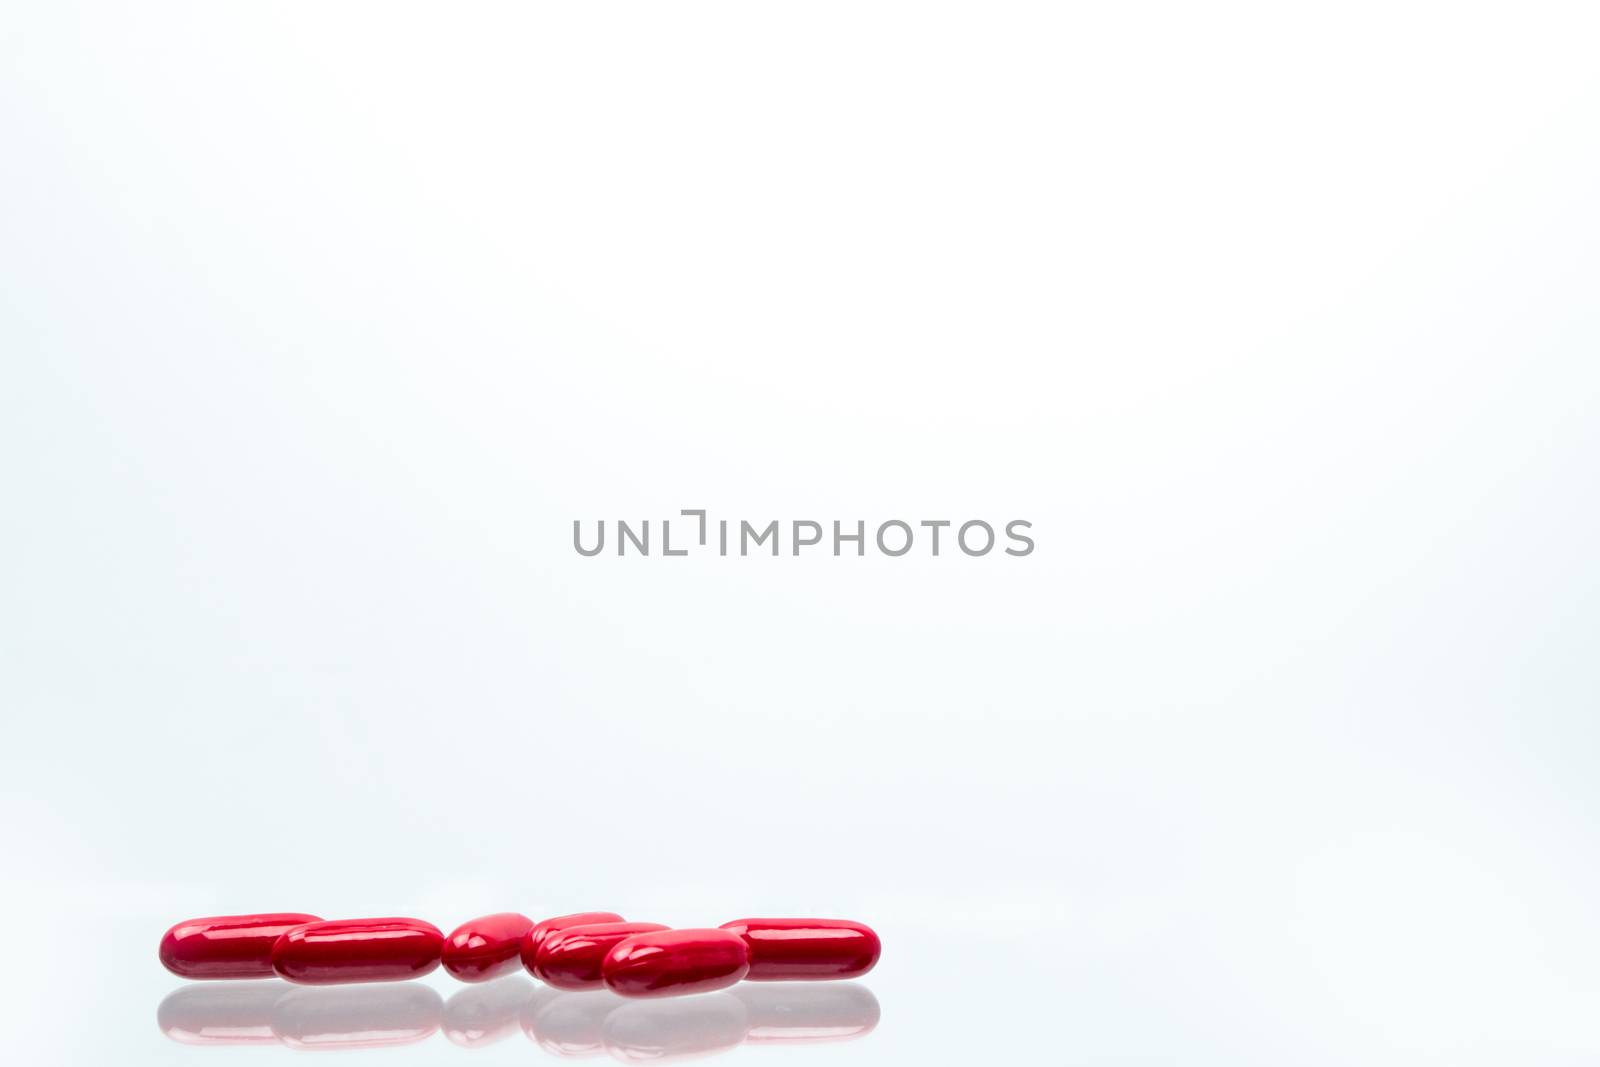 Red capsule pills isolated on white background with shadows and copy space for text. Vitamin and supplement for pregnancy and elderly people. Pharmaceutical industry. Pharmacy background. Global healthcare concept.